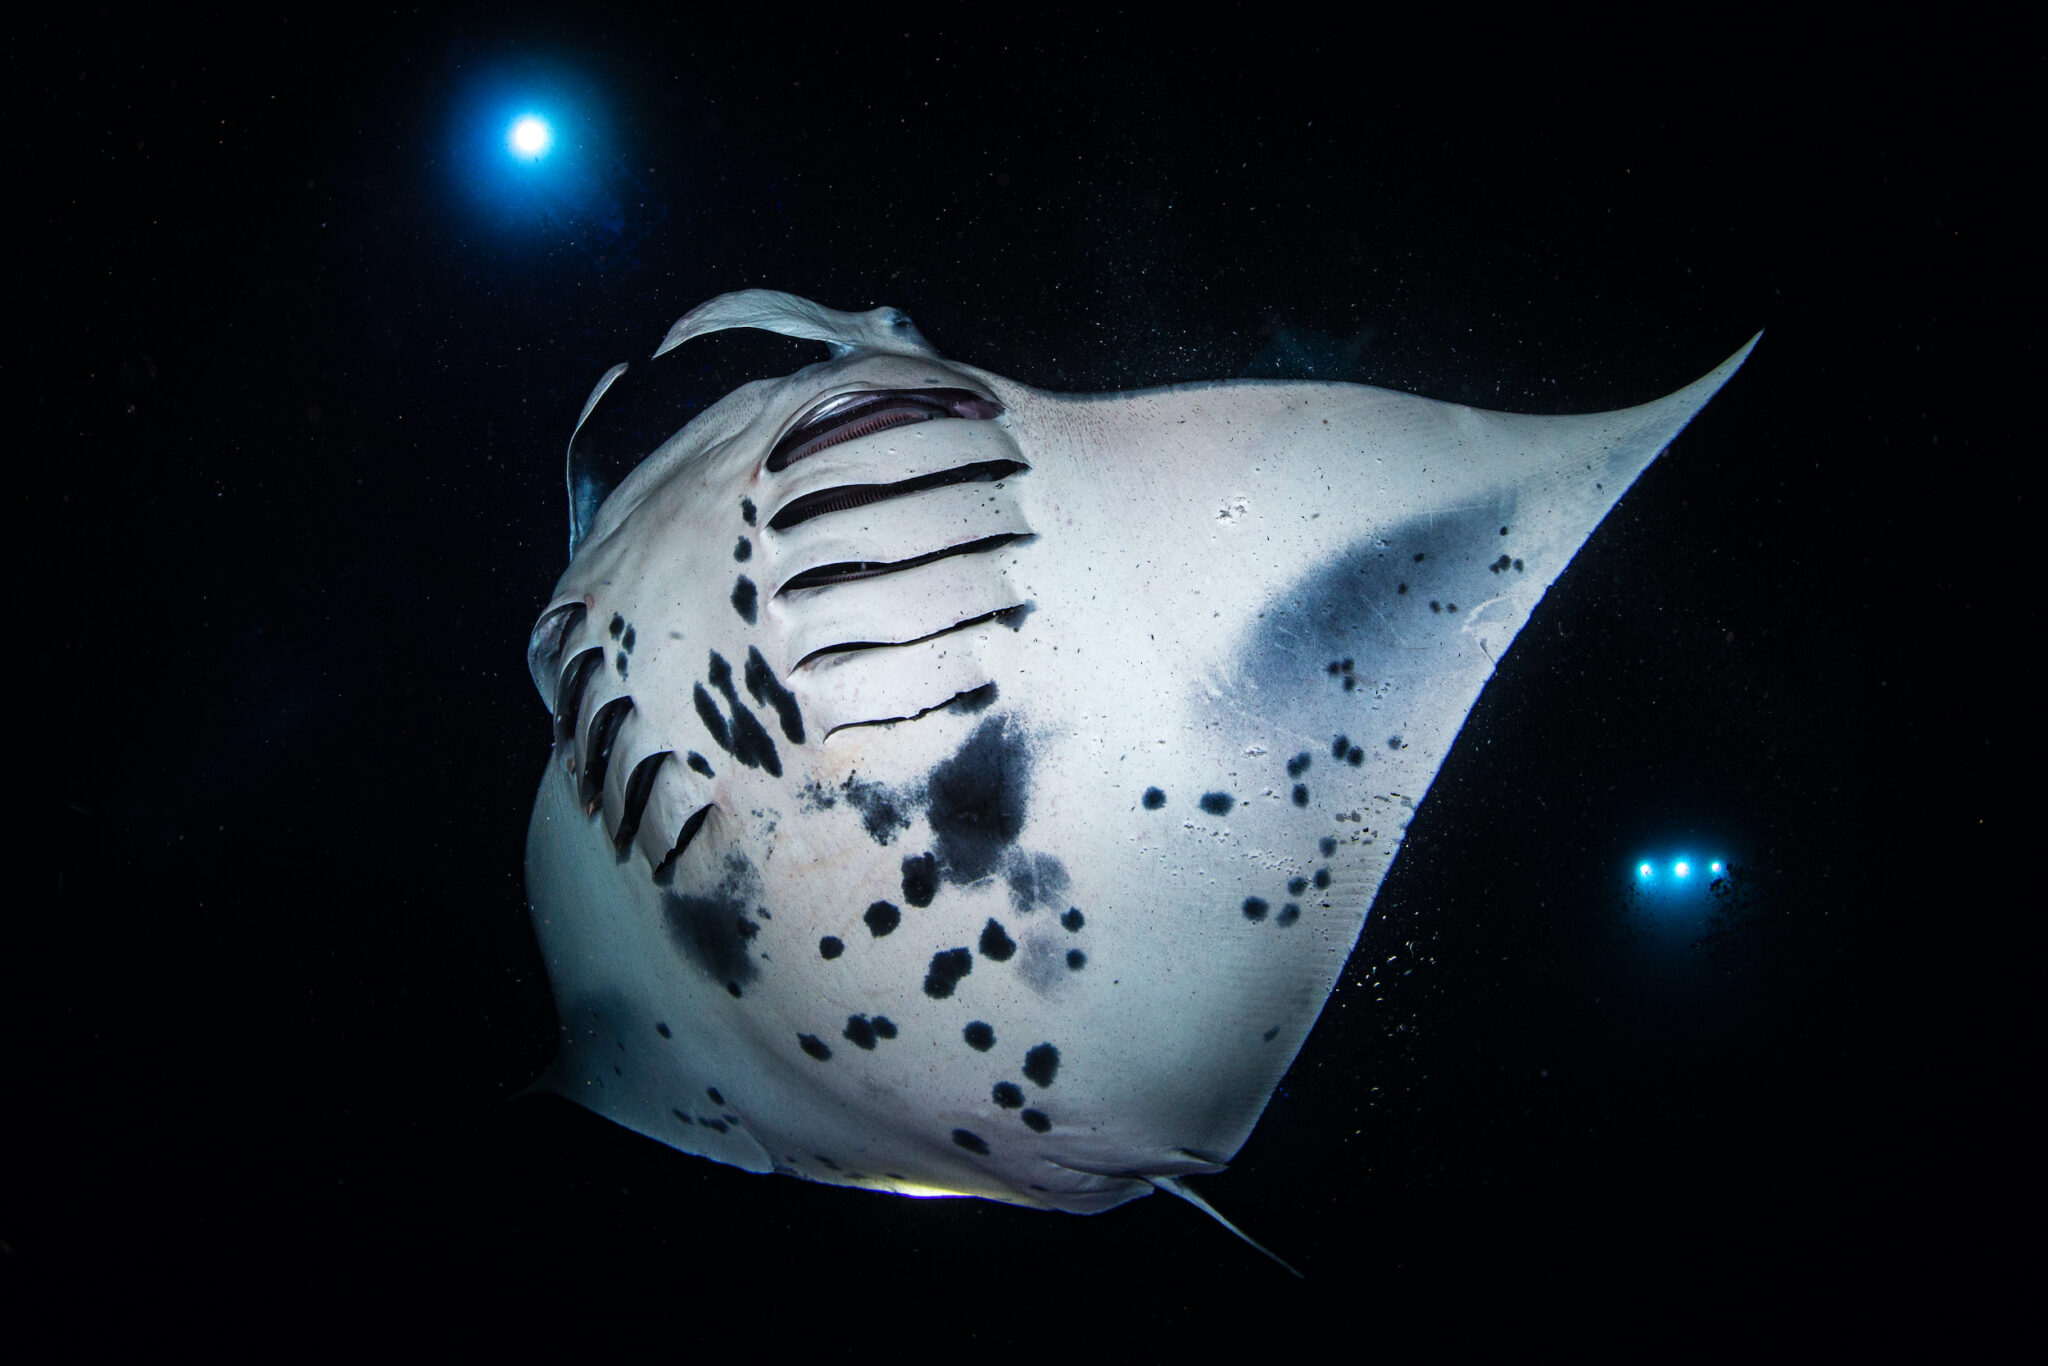 Scuba divers watching a manta ray during a night dive at Kona, Hawaii, one of the best scuba diving holidays in March